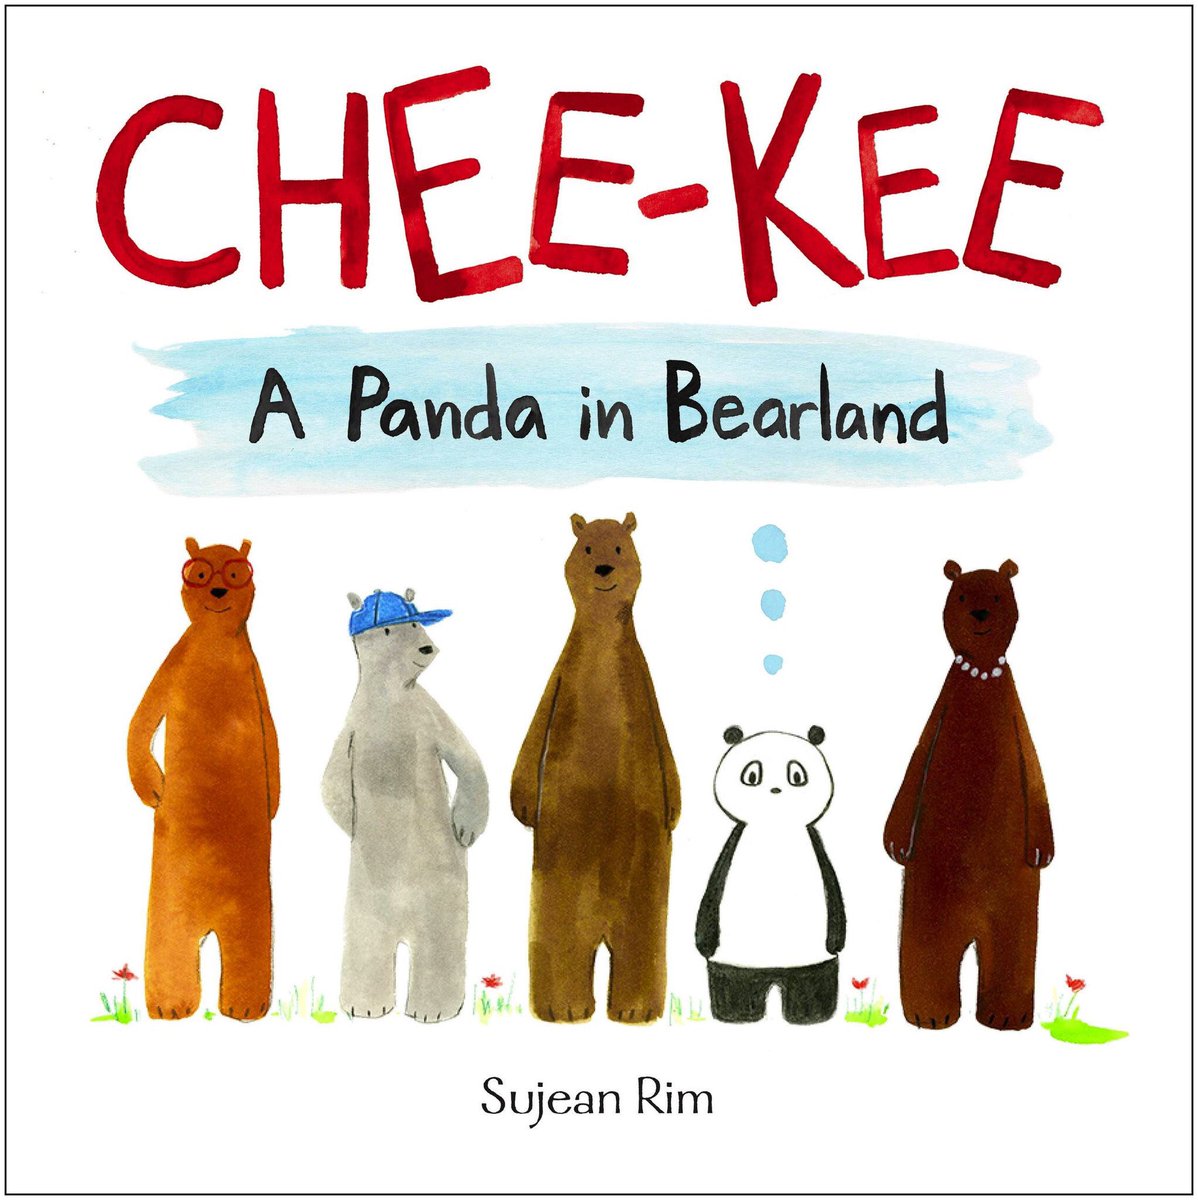 Beautiful @sujeanie story #book perfect for #ZeroDiscrimination Day. Read it outloud & make some noise for Chee-Kee Panda on 1 March.